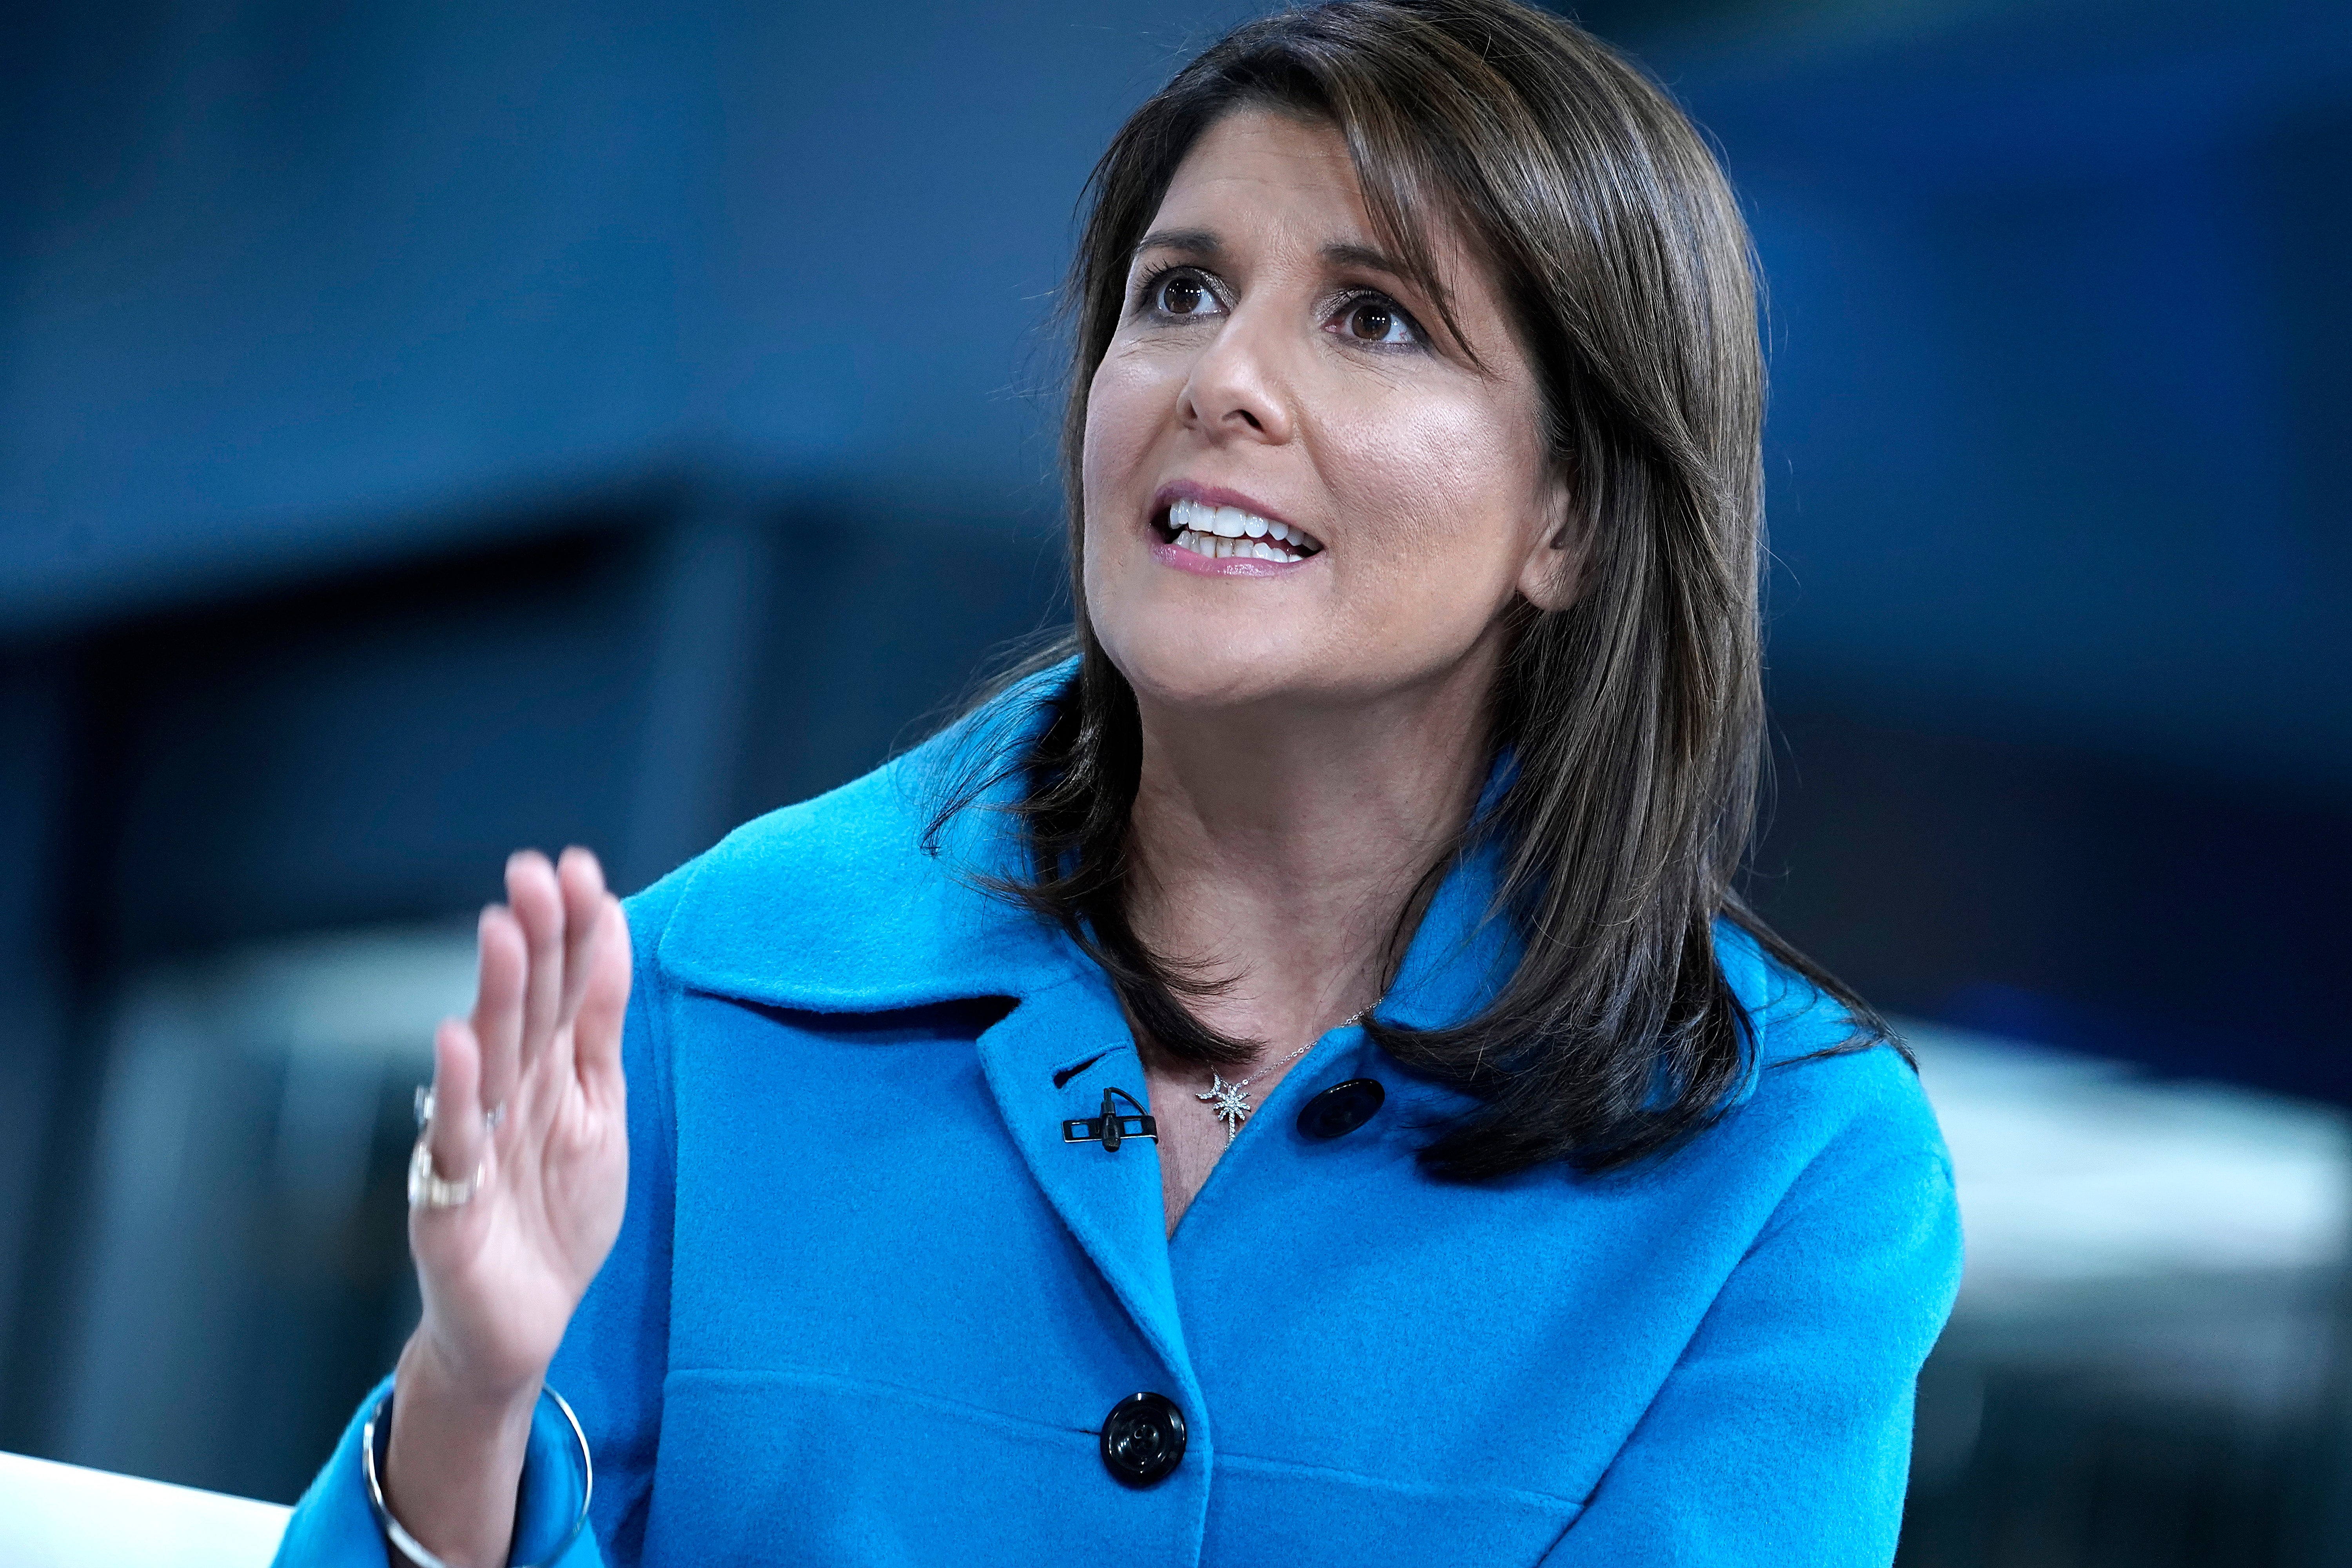 Black Twitter Reacts To Nikki Haley’s Revisionist History Of The Confederate Flag